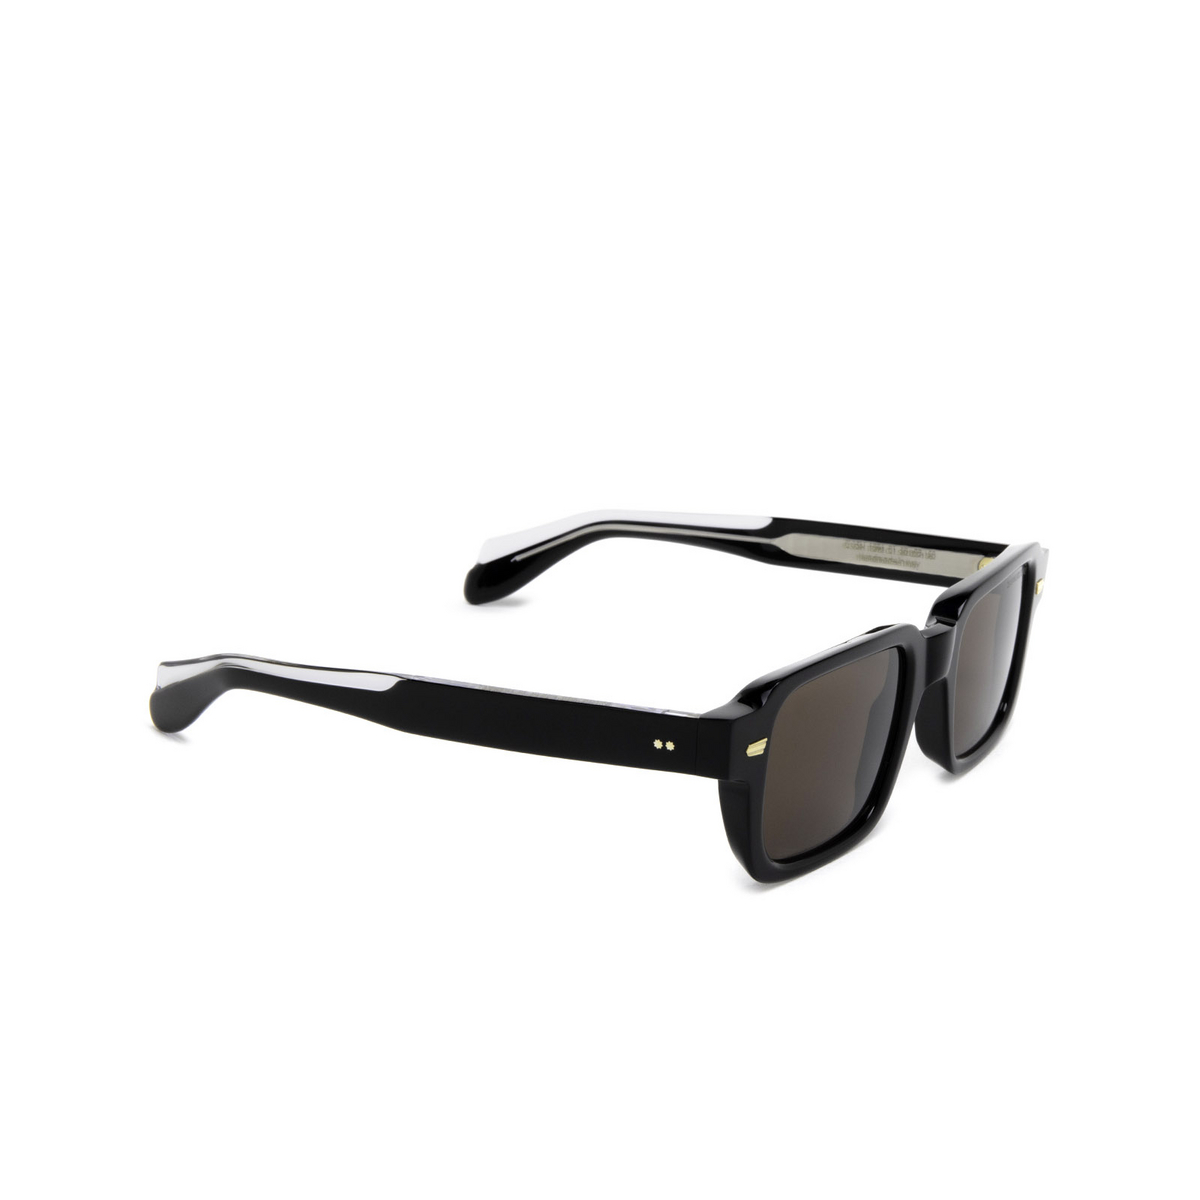 Cutler and Gross 1393 Sunglasses 01 Black - three-quarters view